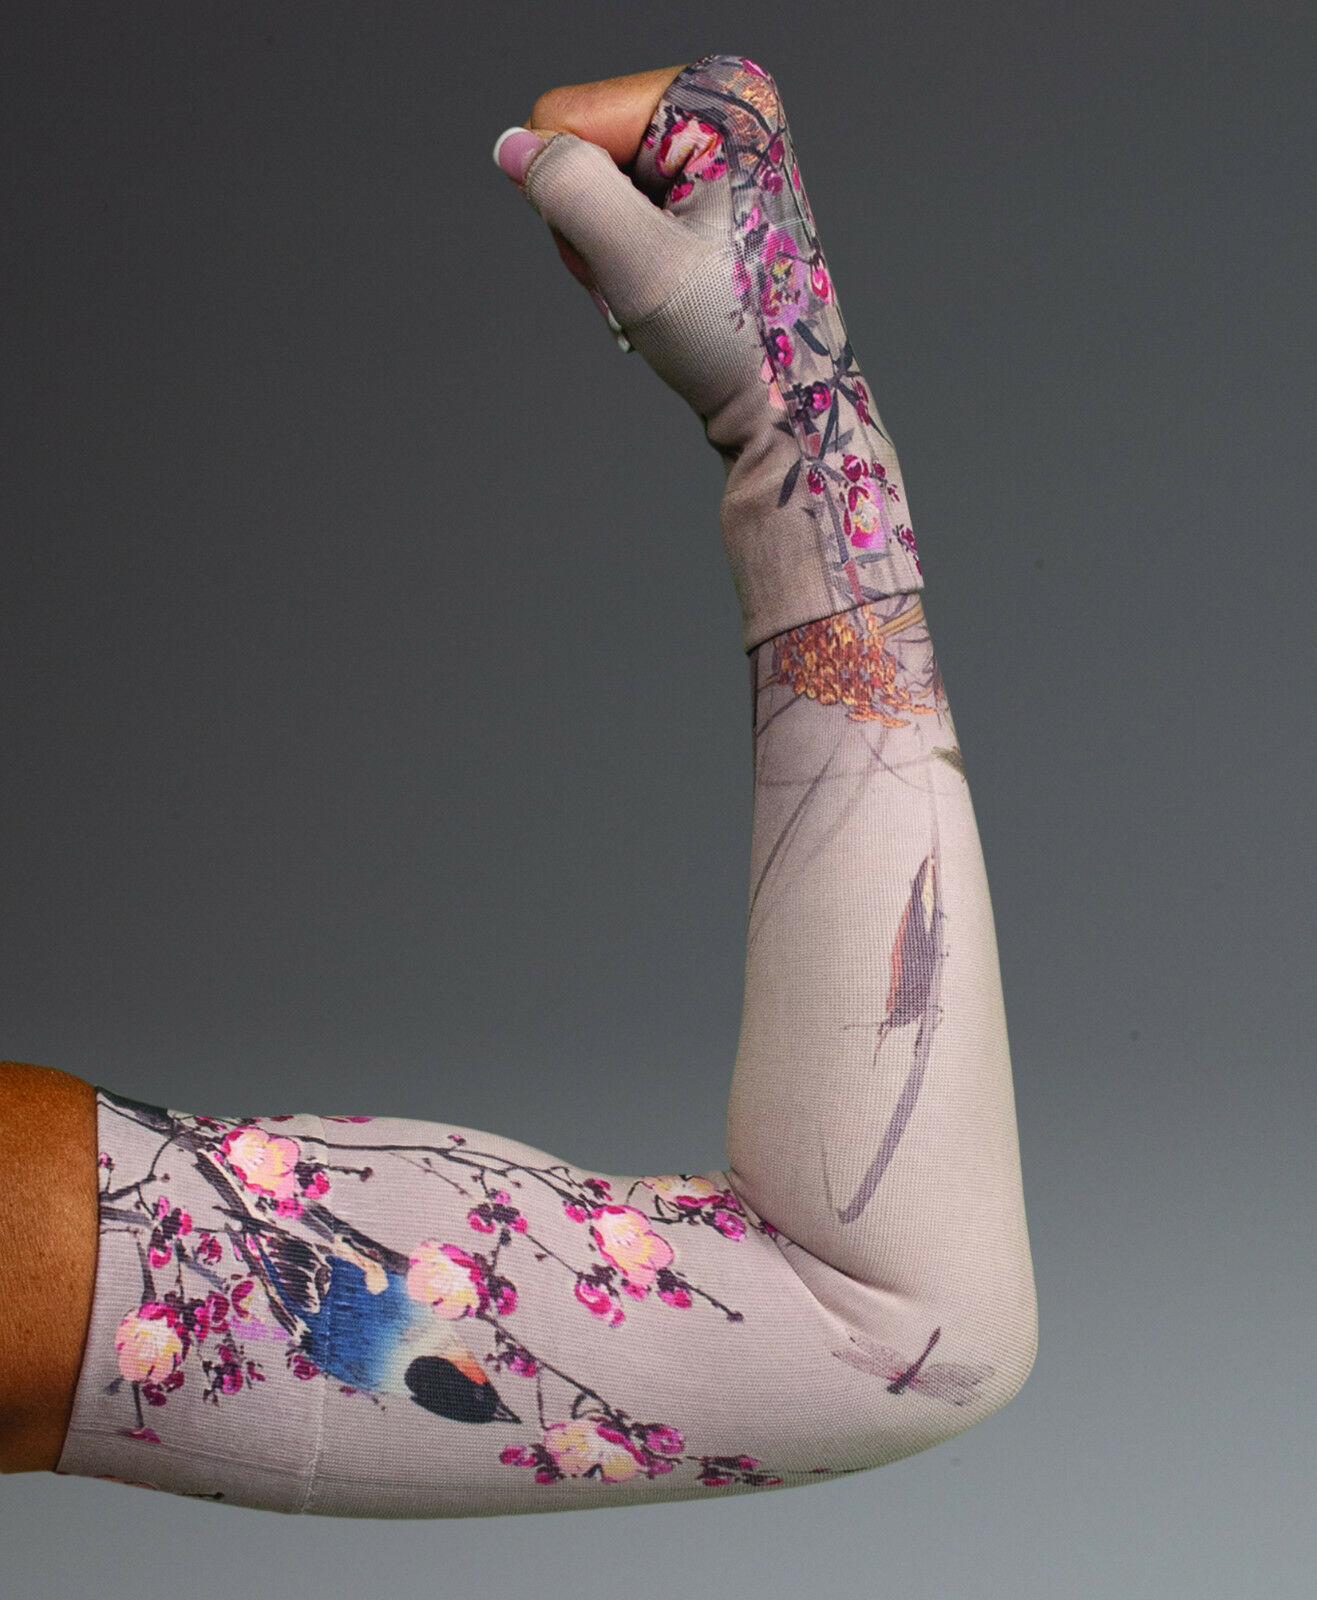 PLUM BLOSSOM by LympheDIVAS, COMPRESSION SLEEVE, GLOVE, GAUNTLET OR COMBO, NEW!